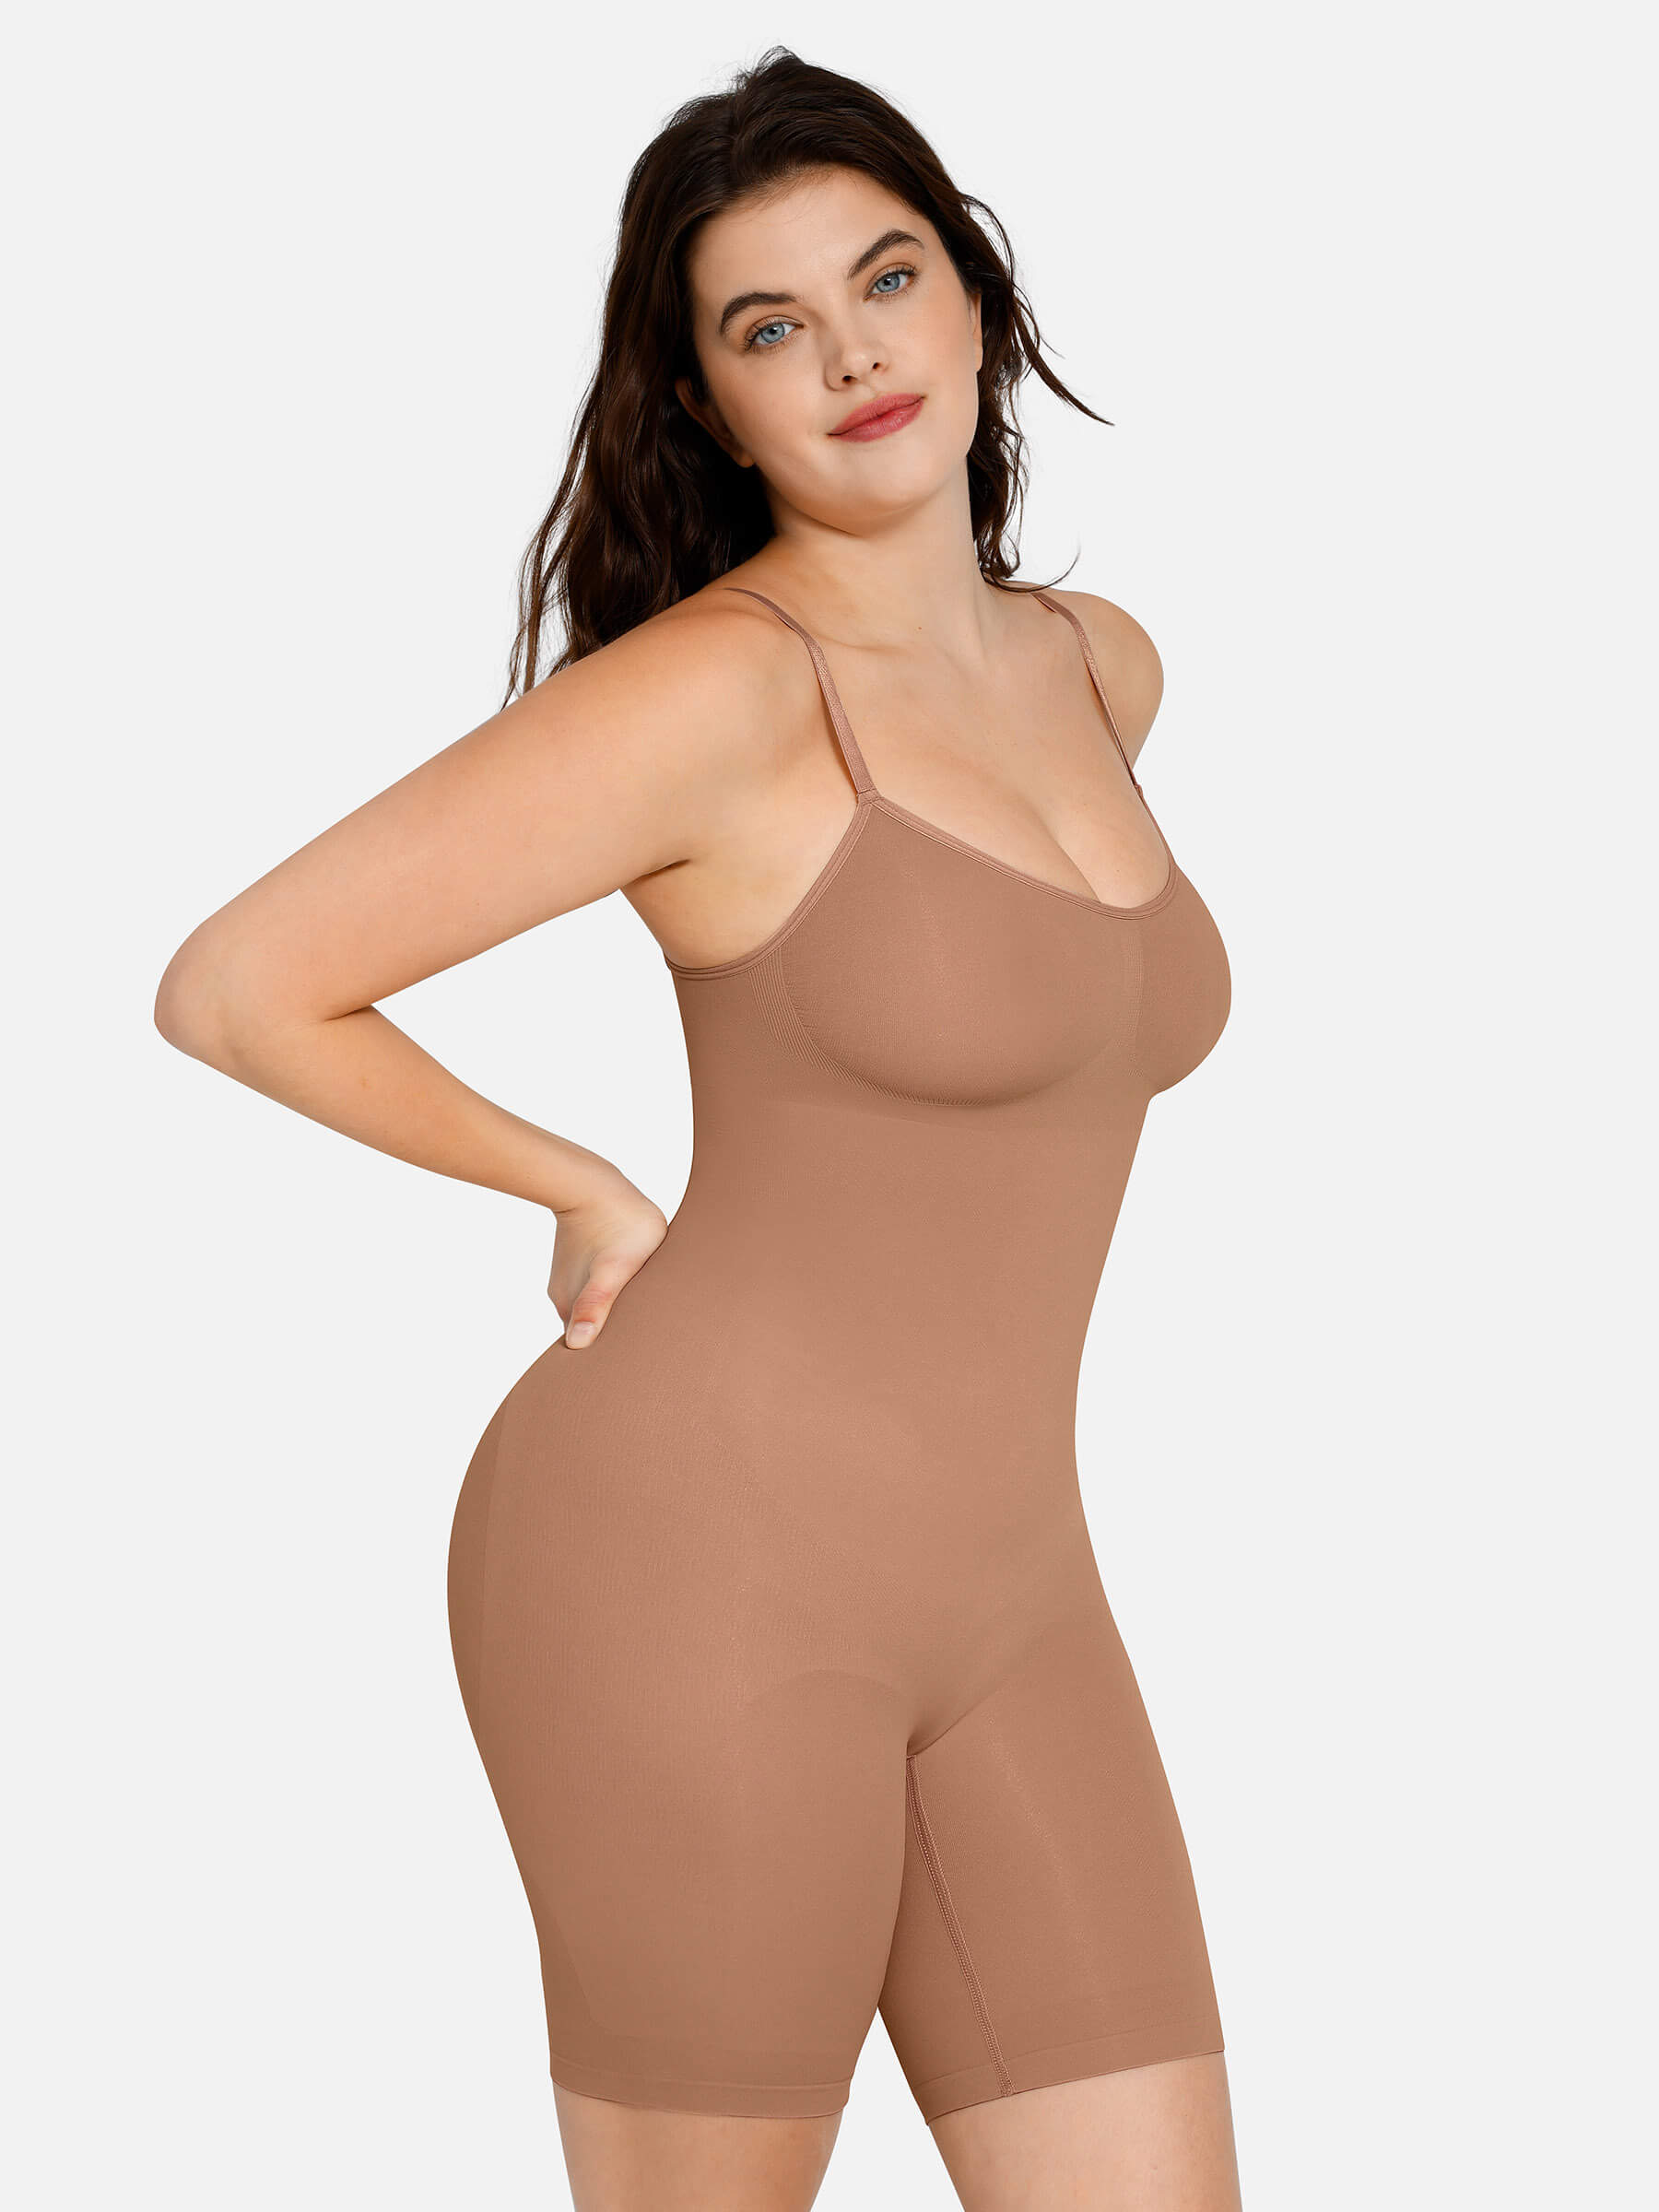 All Day Every Day Tummy Control Slimming Bodysuit